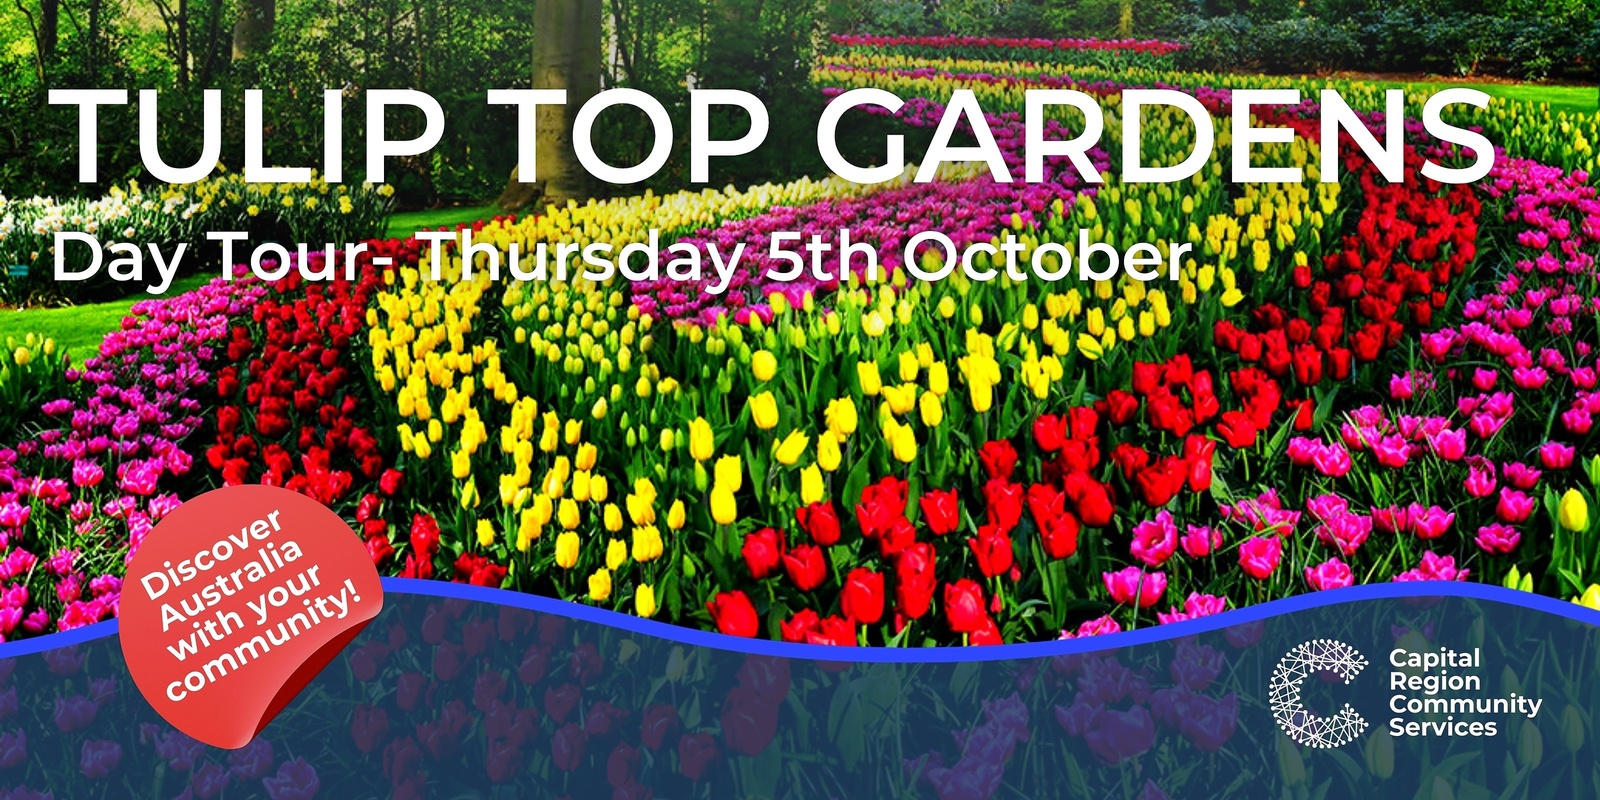 Banner image for Tulip Top Gardens, Day Tour 